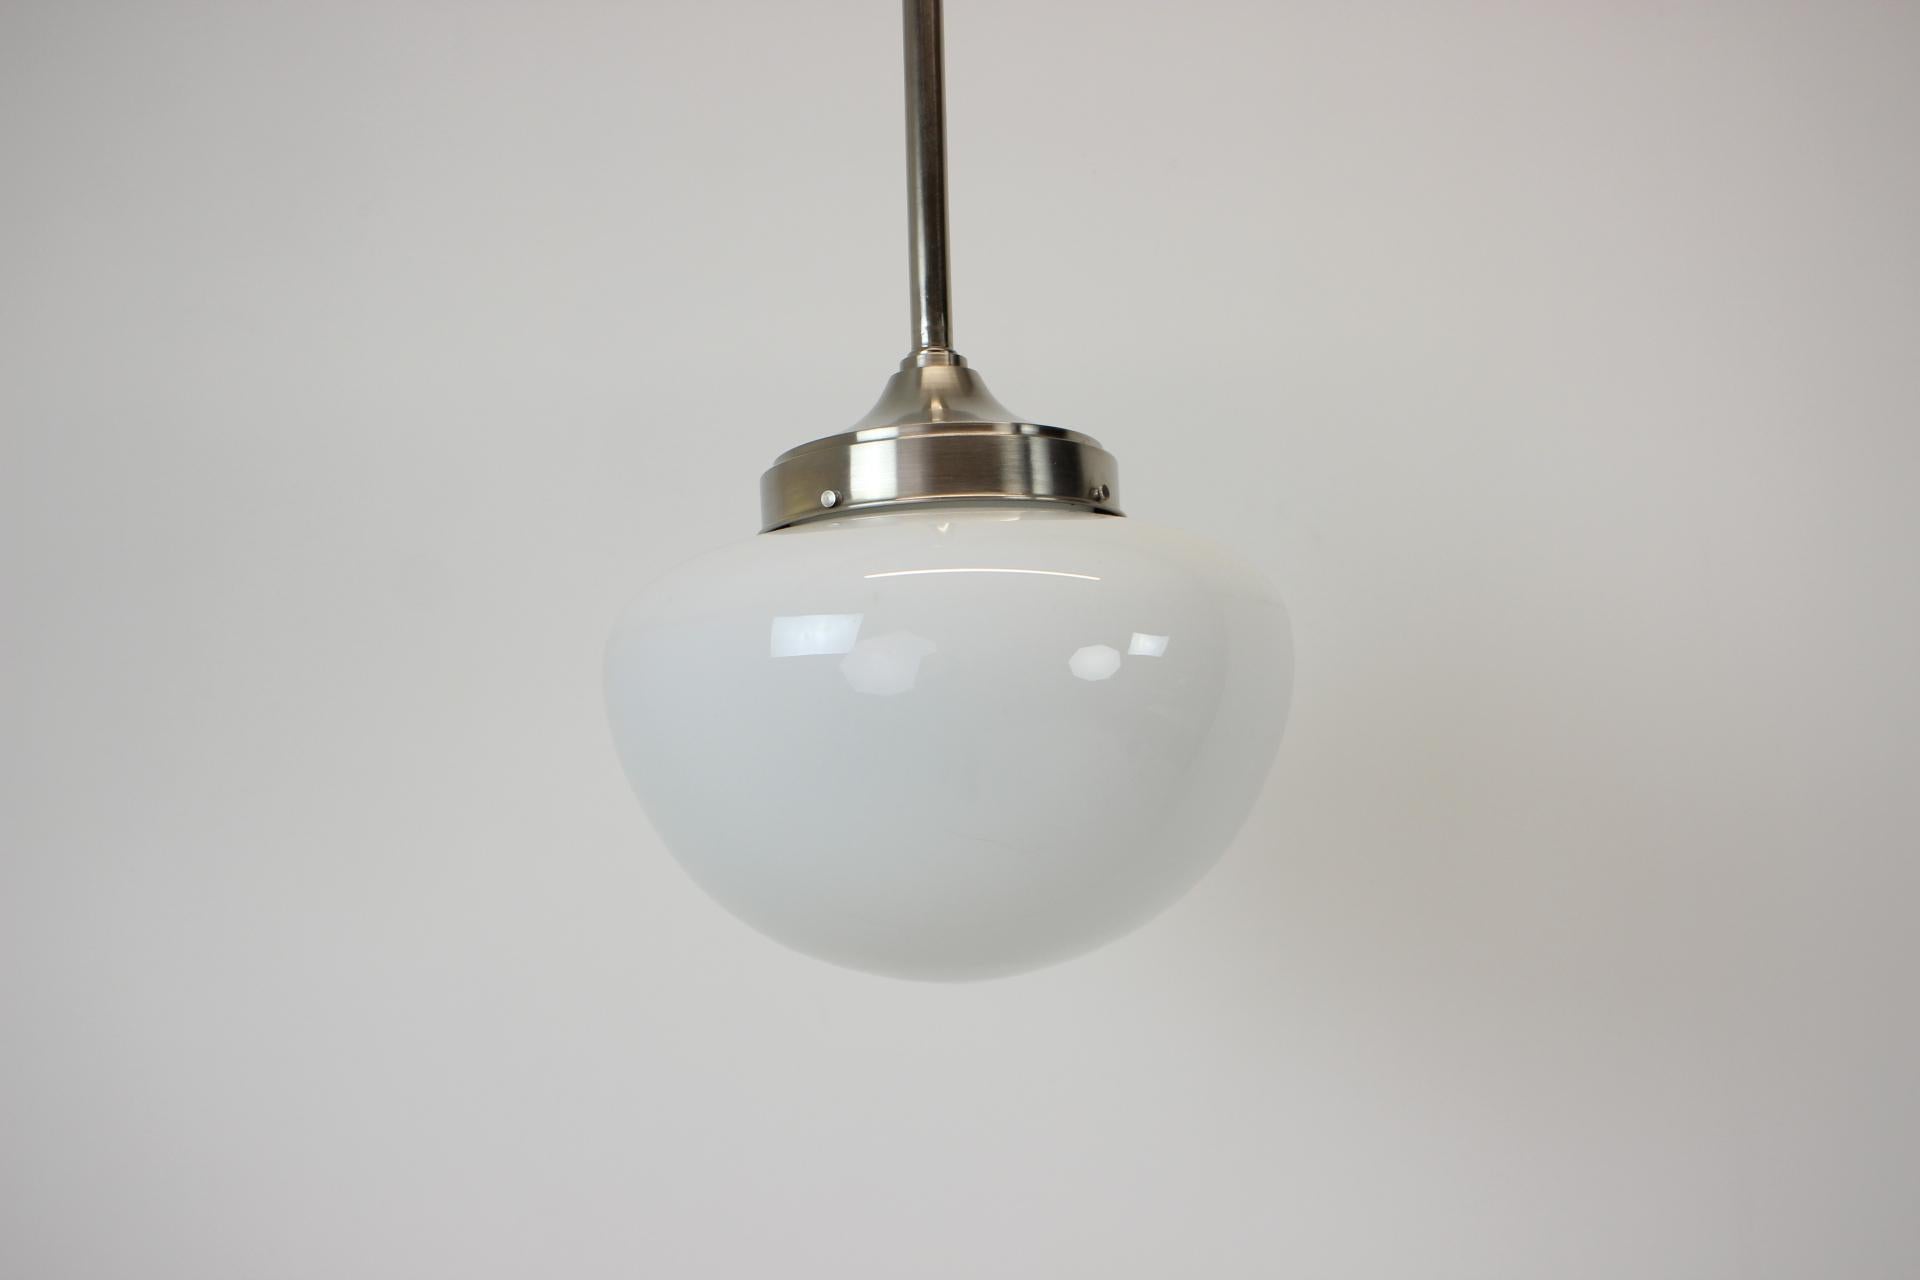 Made in Czechoslovakia
Made of nickel-plated brass and glass
Good original condition
Bulb 1x60W, E27 or E26
New cables